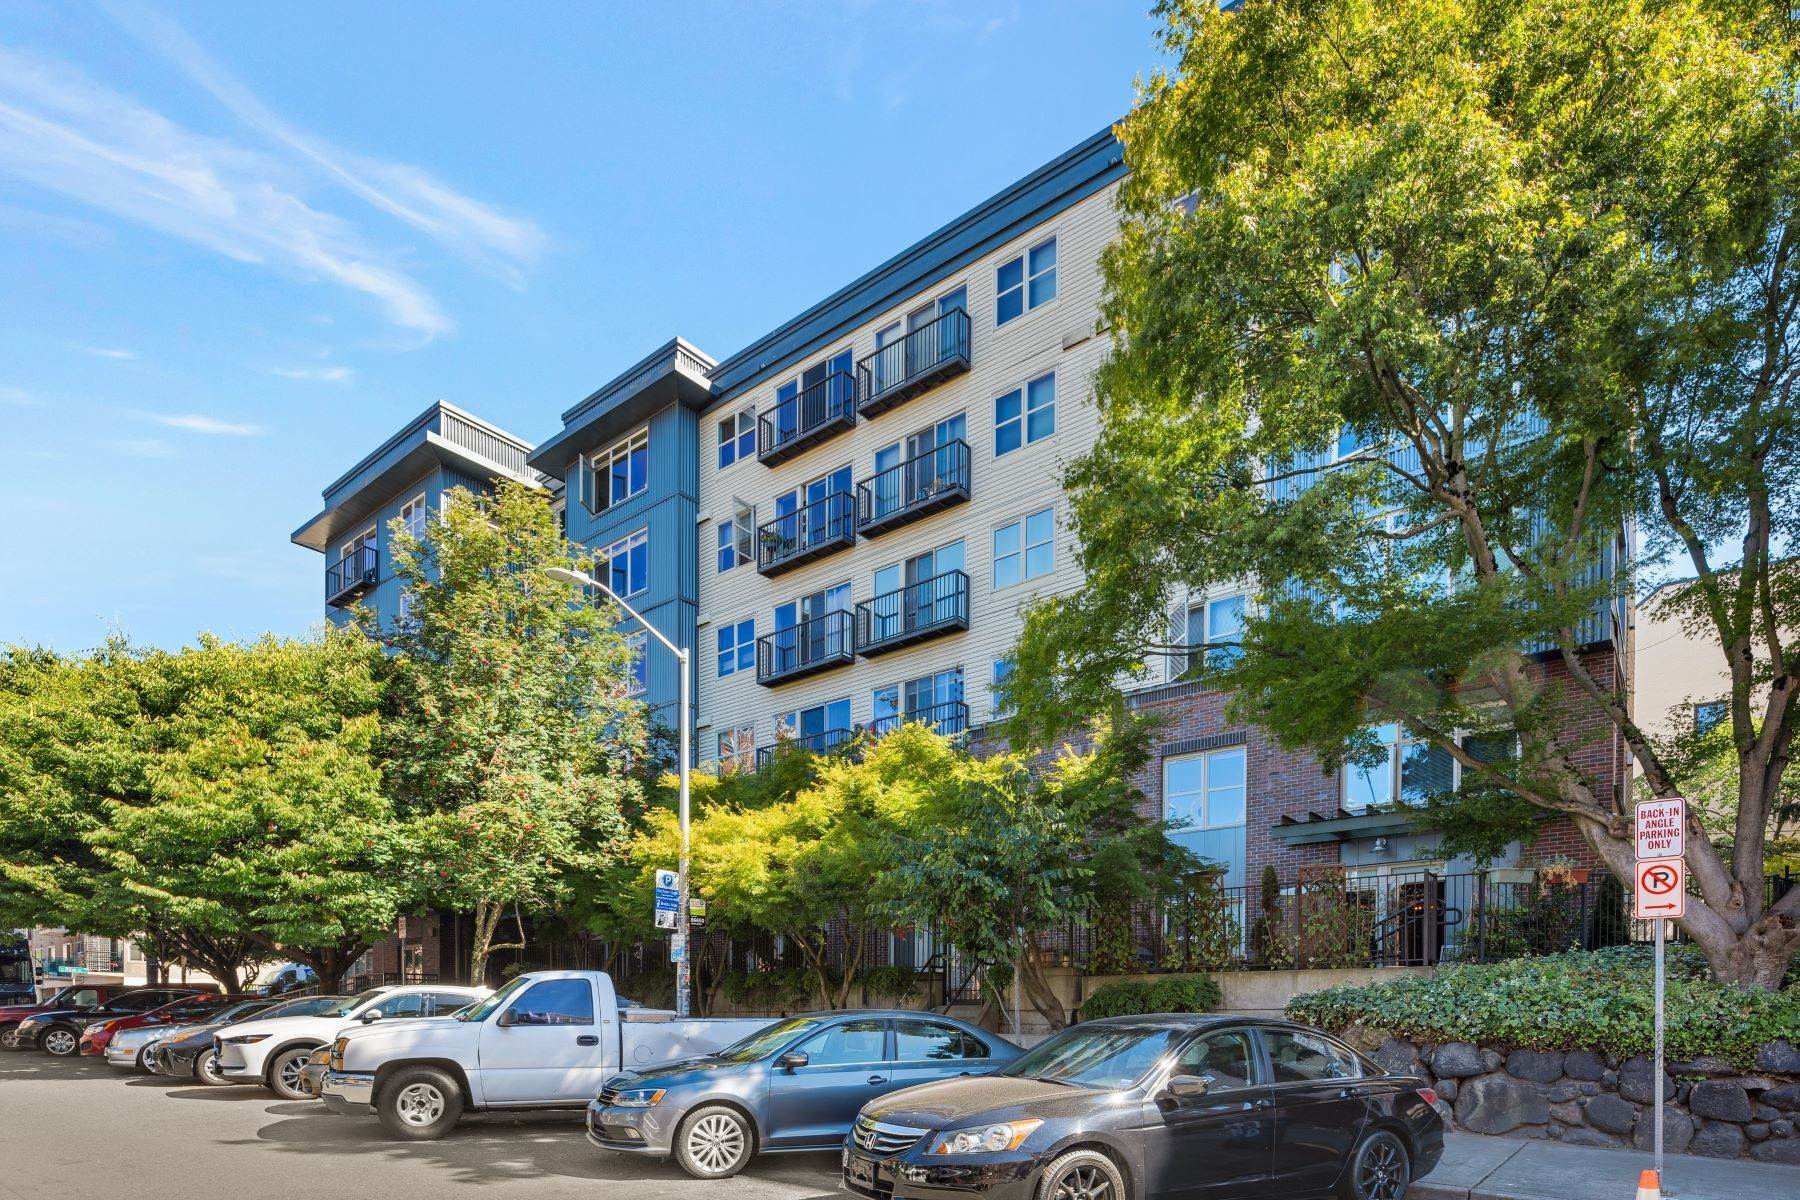 1. Condominiums for Sale at 1620 Belmont Ave Unit #230, Seattle, WA 98122 1620 Belmont Ave Unit #230 Seattle, Washington 98122 United States